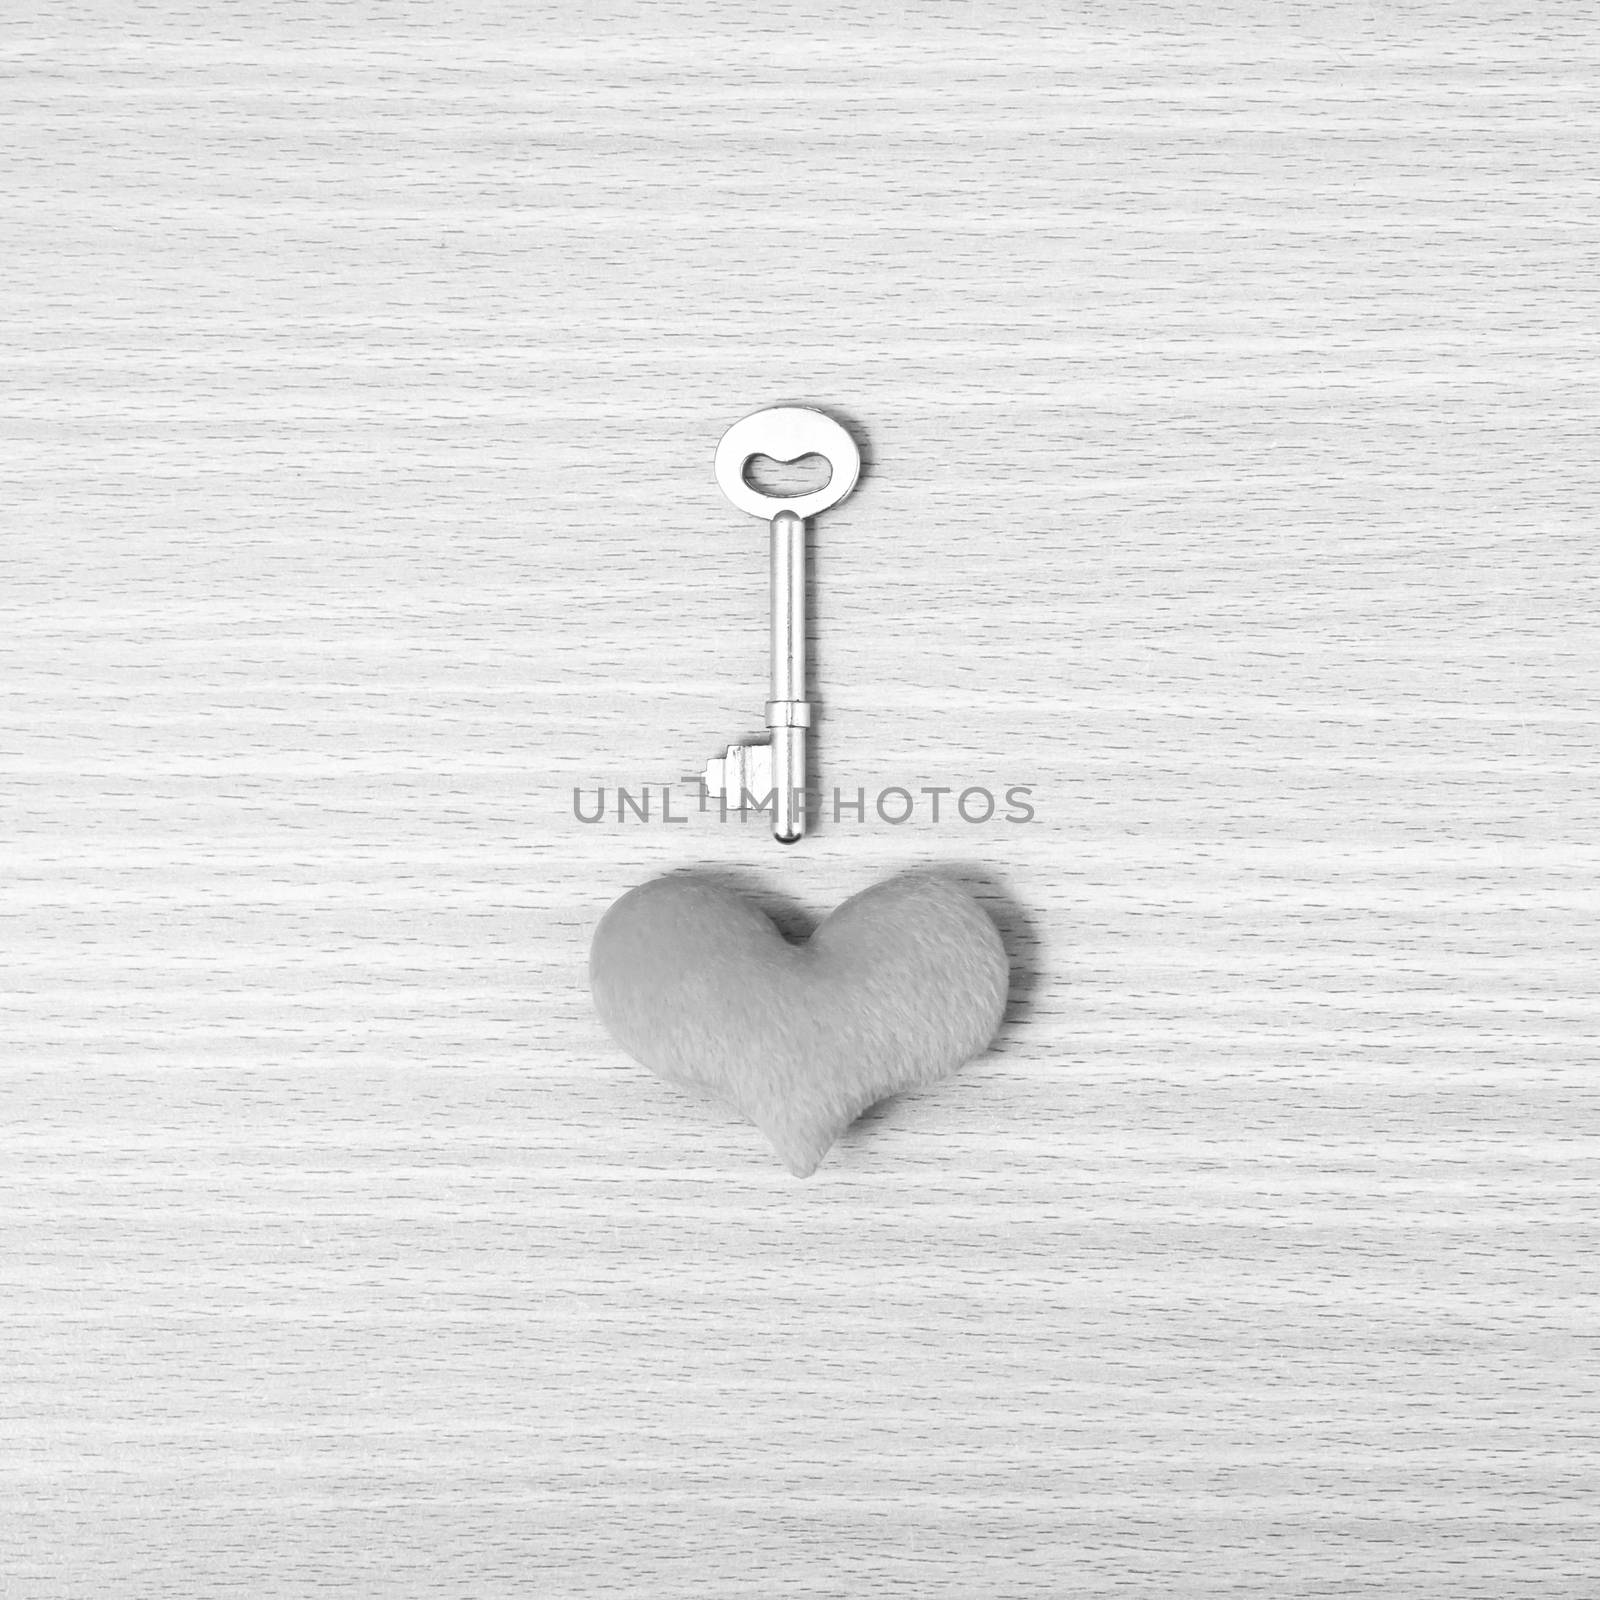 red heart with key on wood table background black and white color